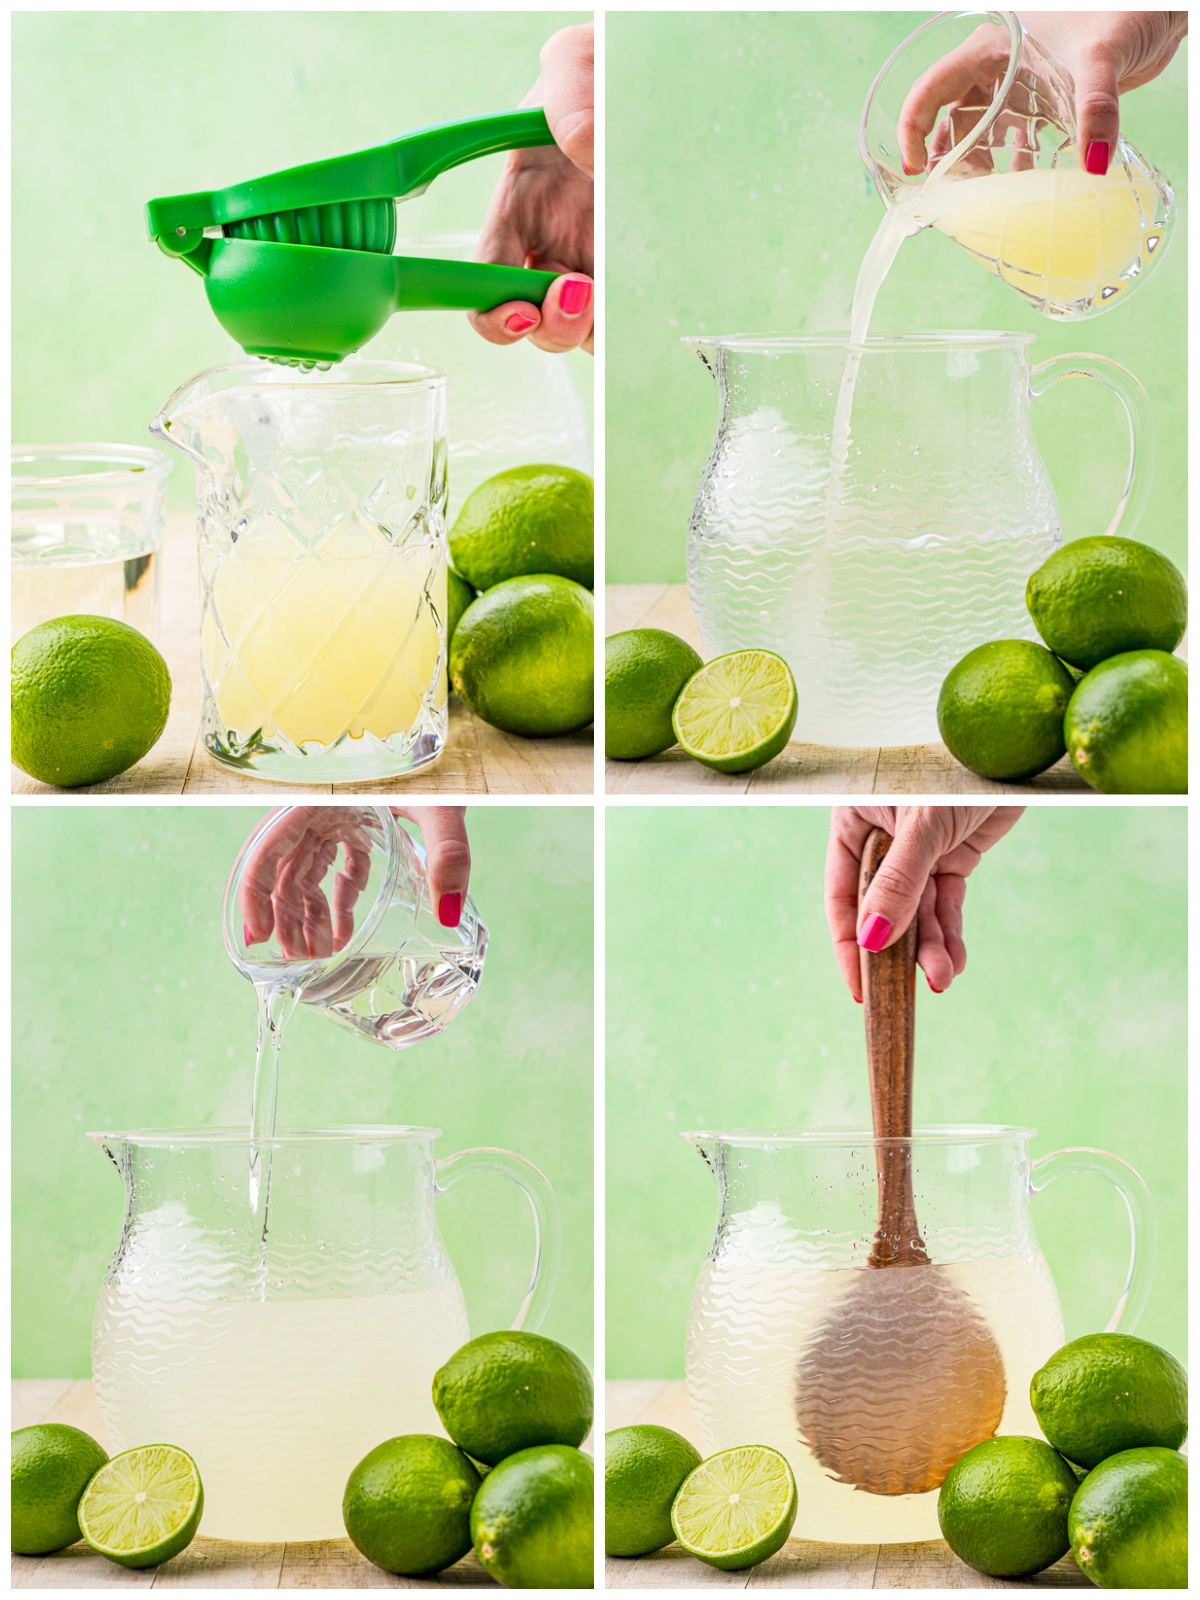 Step by step photos on how to make a Limeade Recipe